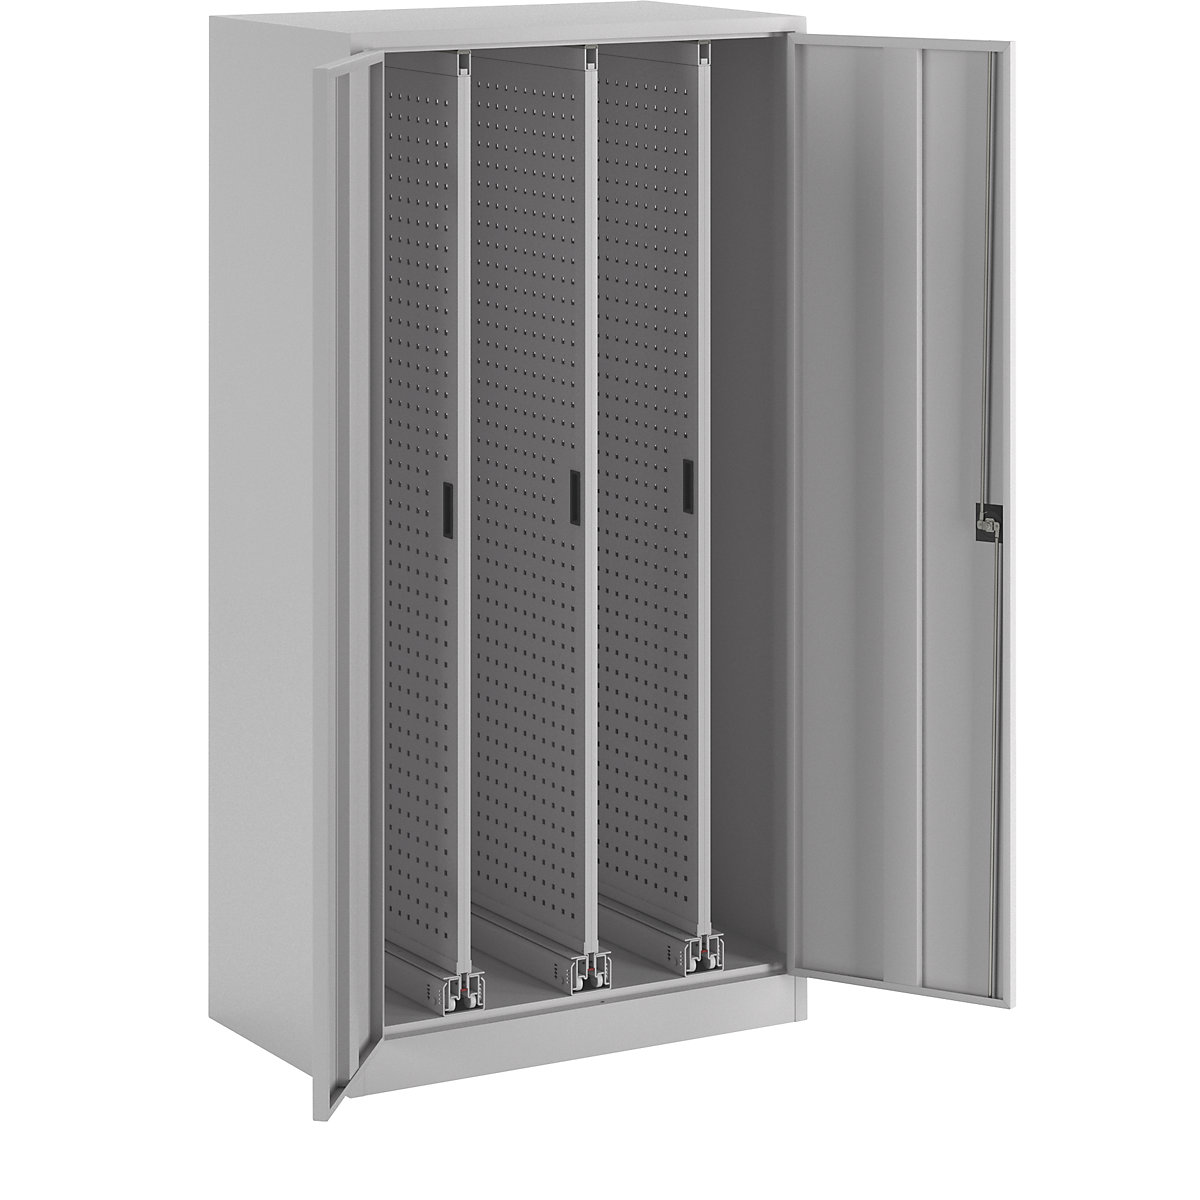 Vertical pull-out cupboard - Pavoy